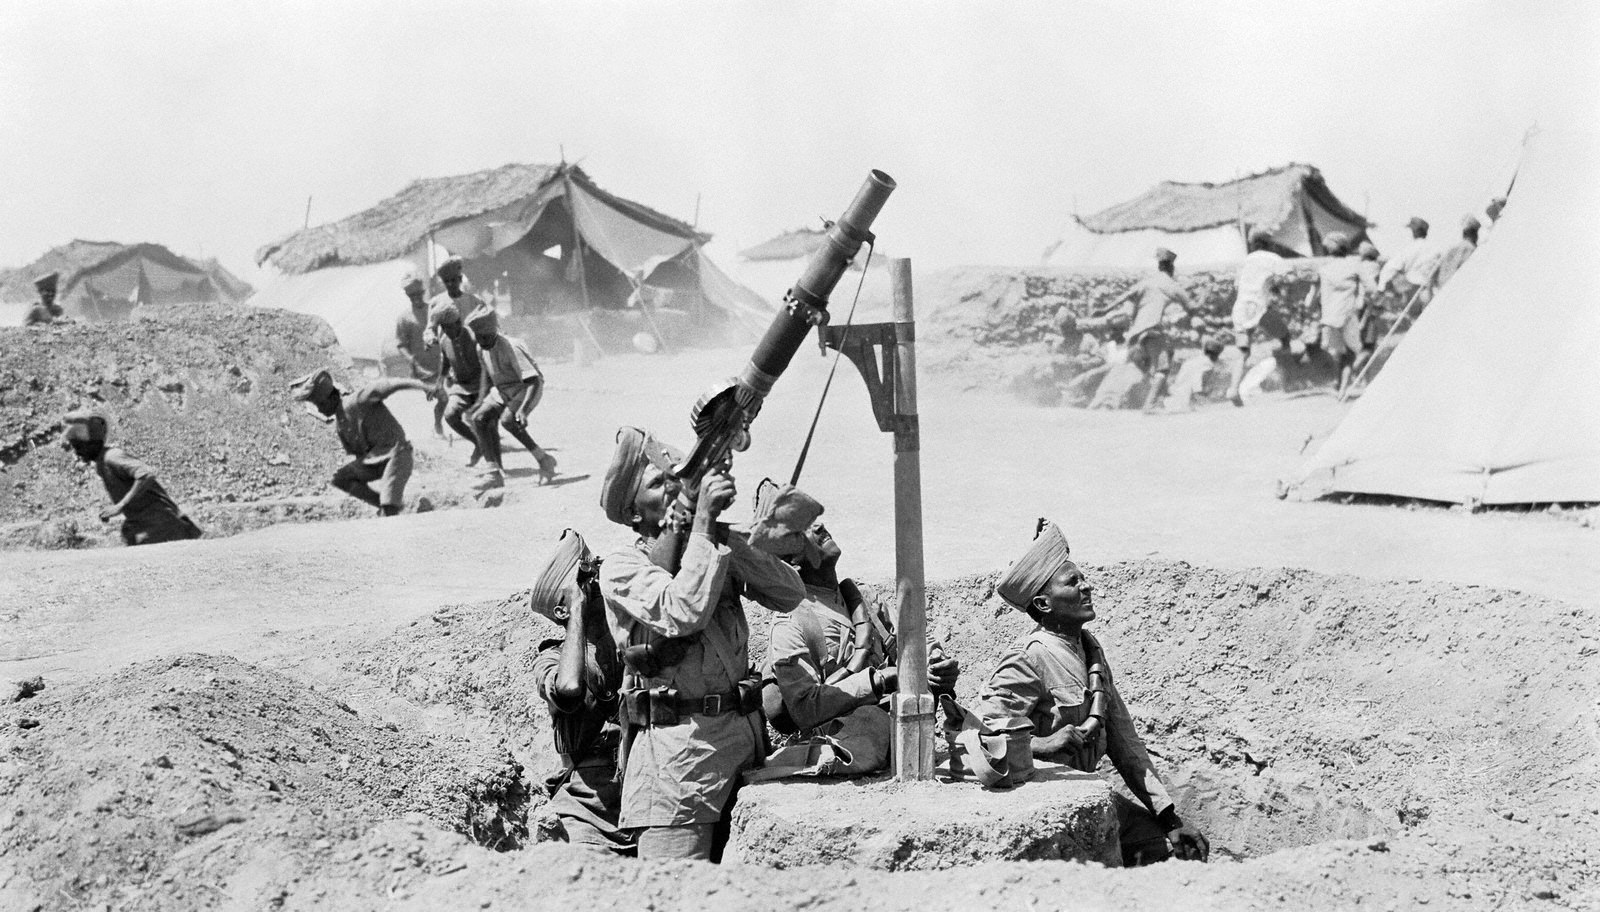 Indian troops man a Lewis Gun to target an approaching Ottoman Empire air attack on the Mesopotamian Front during WWI in 1918. Most people associate WWI to the Western front in France and Belgium, and perhaps the Eastern front between the Baltic and Black Seas. However, the Mesopotamian Front, or Middle Eastern Theatre of WWI, was also a major front, which had mostly British, Indian, and Australian troops against the Ottoman Empire in the Middle East. It existed throughout the entire war, comprised of 5 massive campaigns, involving nearly 7 million troops, and had over 1.5 million casualties on all sides.